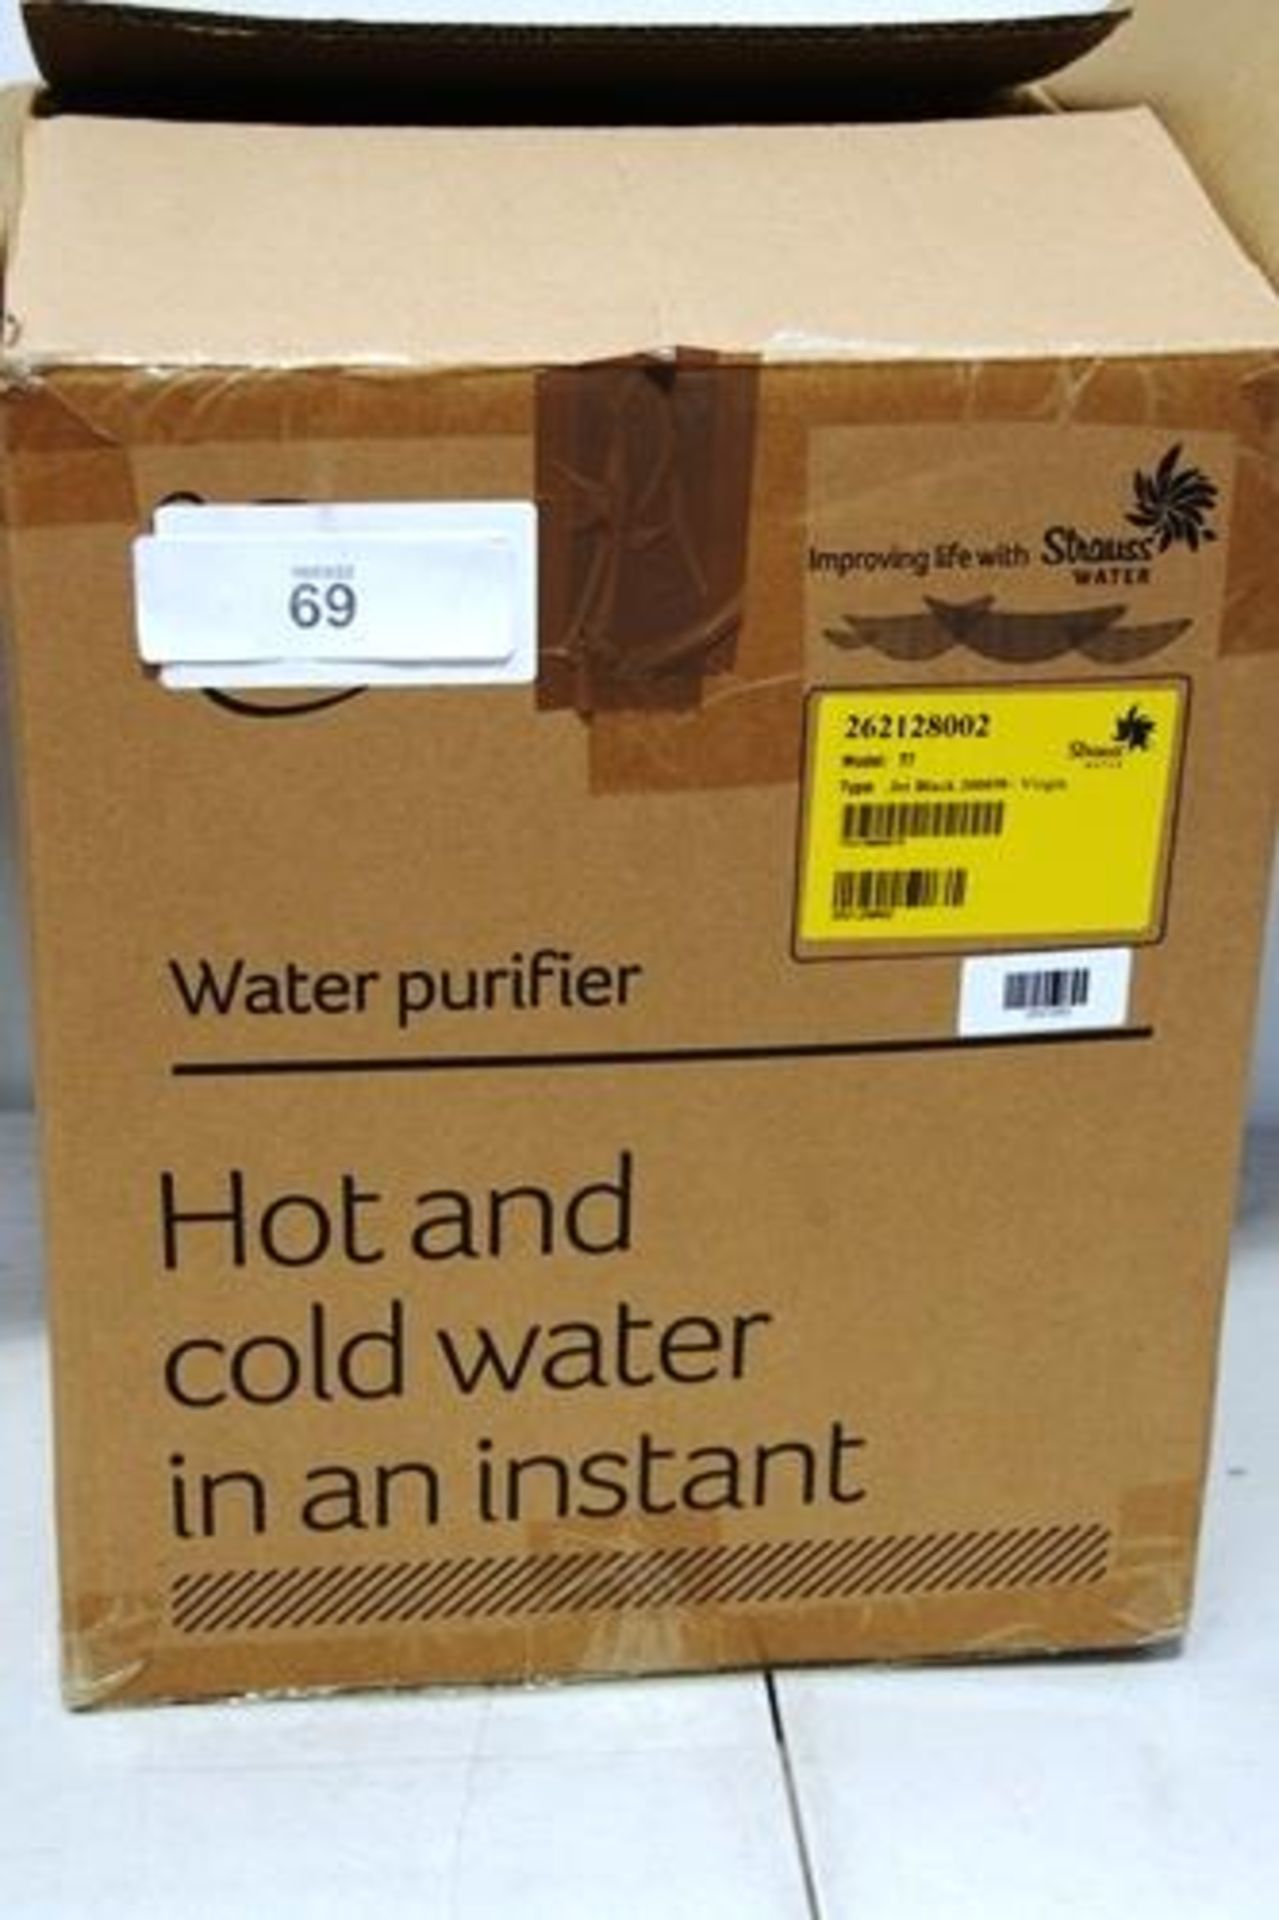 1 x Virgin Pure Water purifier, model T7 - New (ES2) - Image 2 of 2